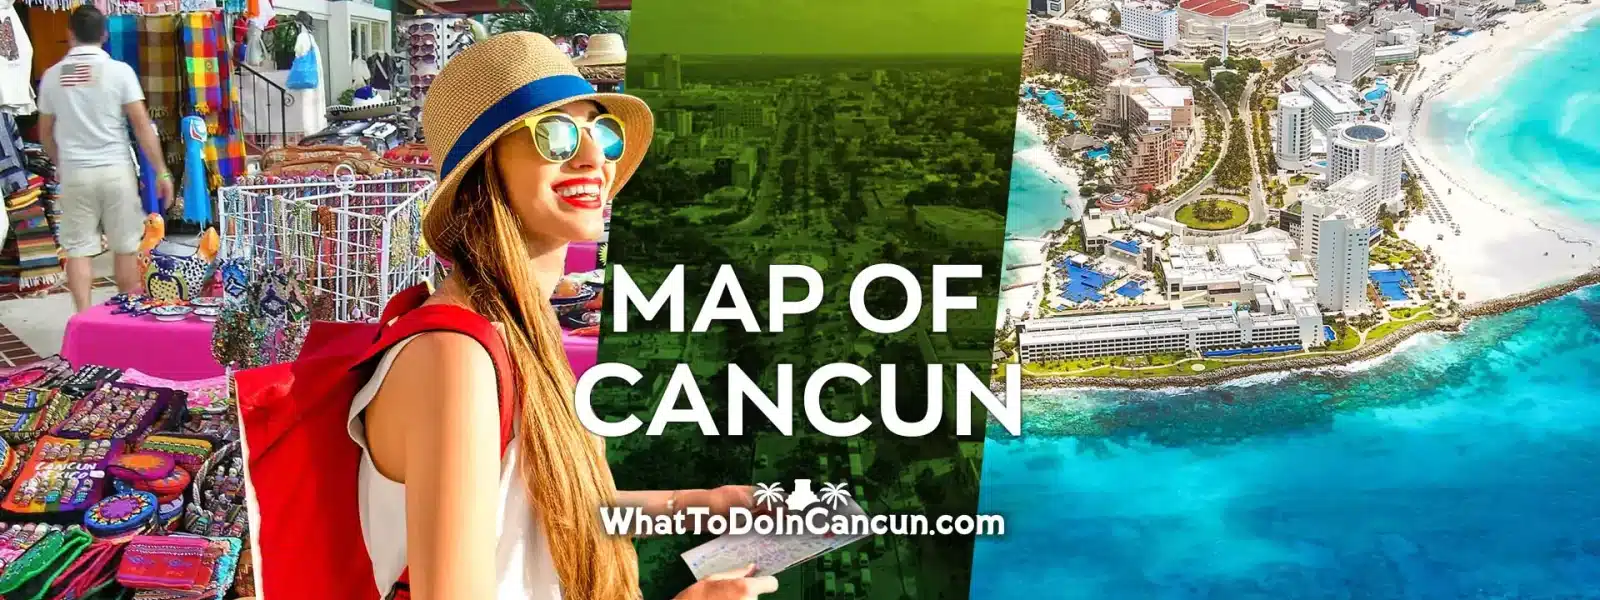 map-of-cancun